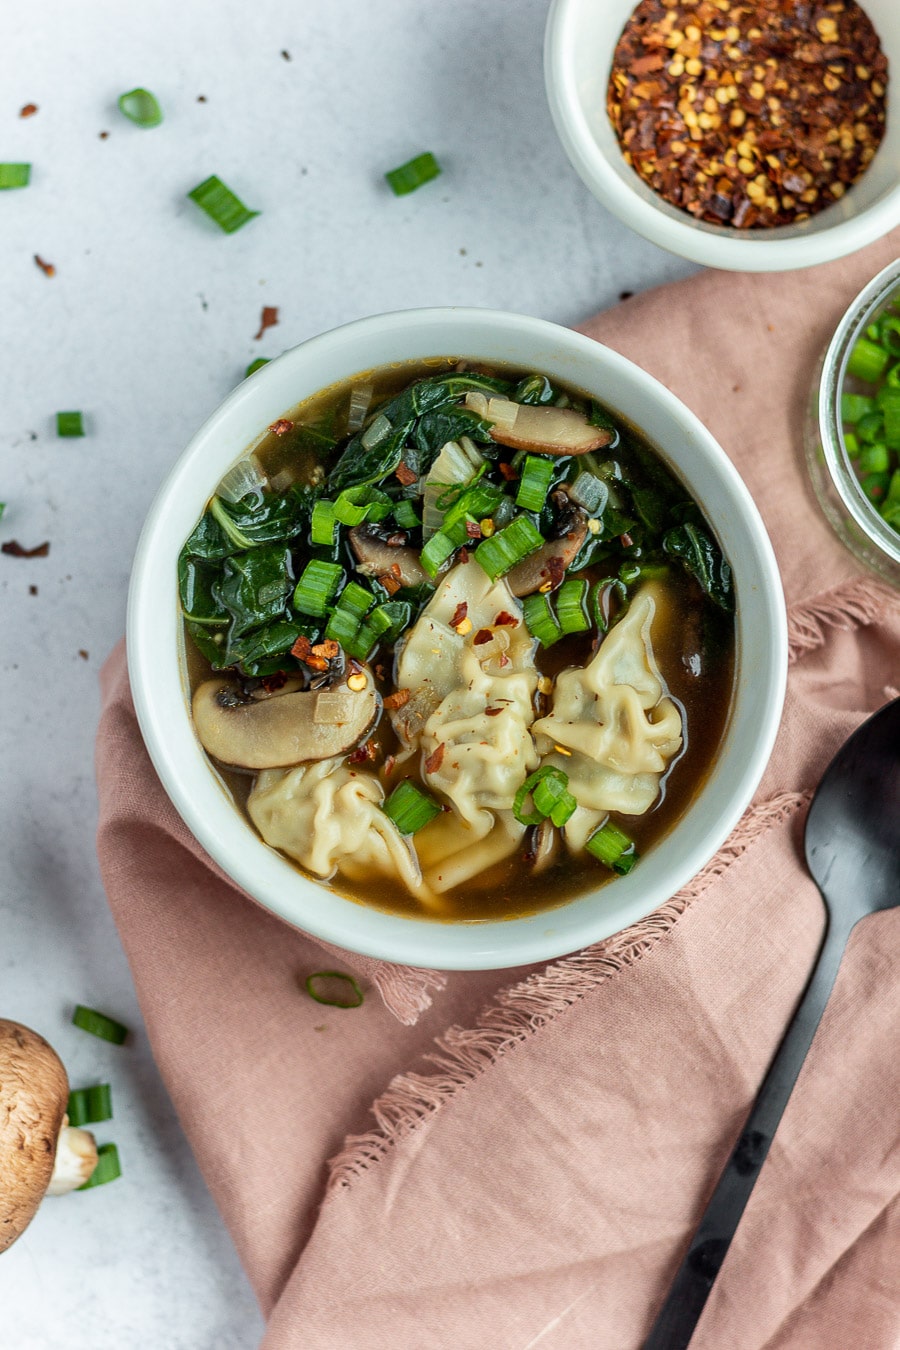 This easy wonton soup with frozen wontons is one of my favorite easy soup recipes. It's so cozy and perfect for a winter dinner recipe. Plus, I will take any excuse to make recipes with Trader Joe's Chicken Cilantro frozen wontons. They are seriously one of my favorite grocery items!